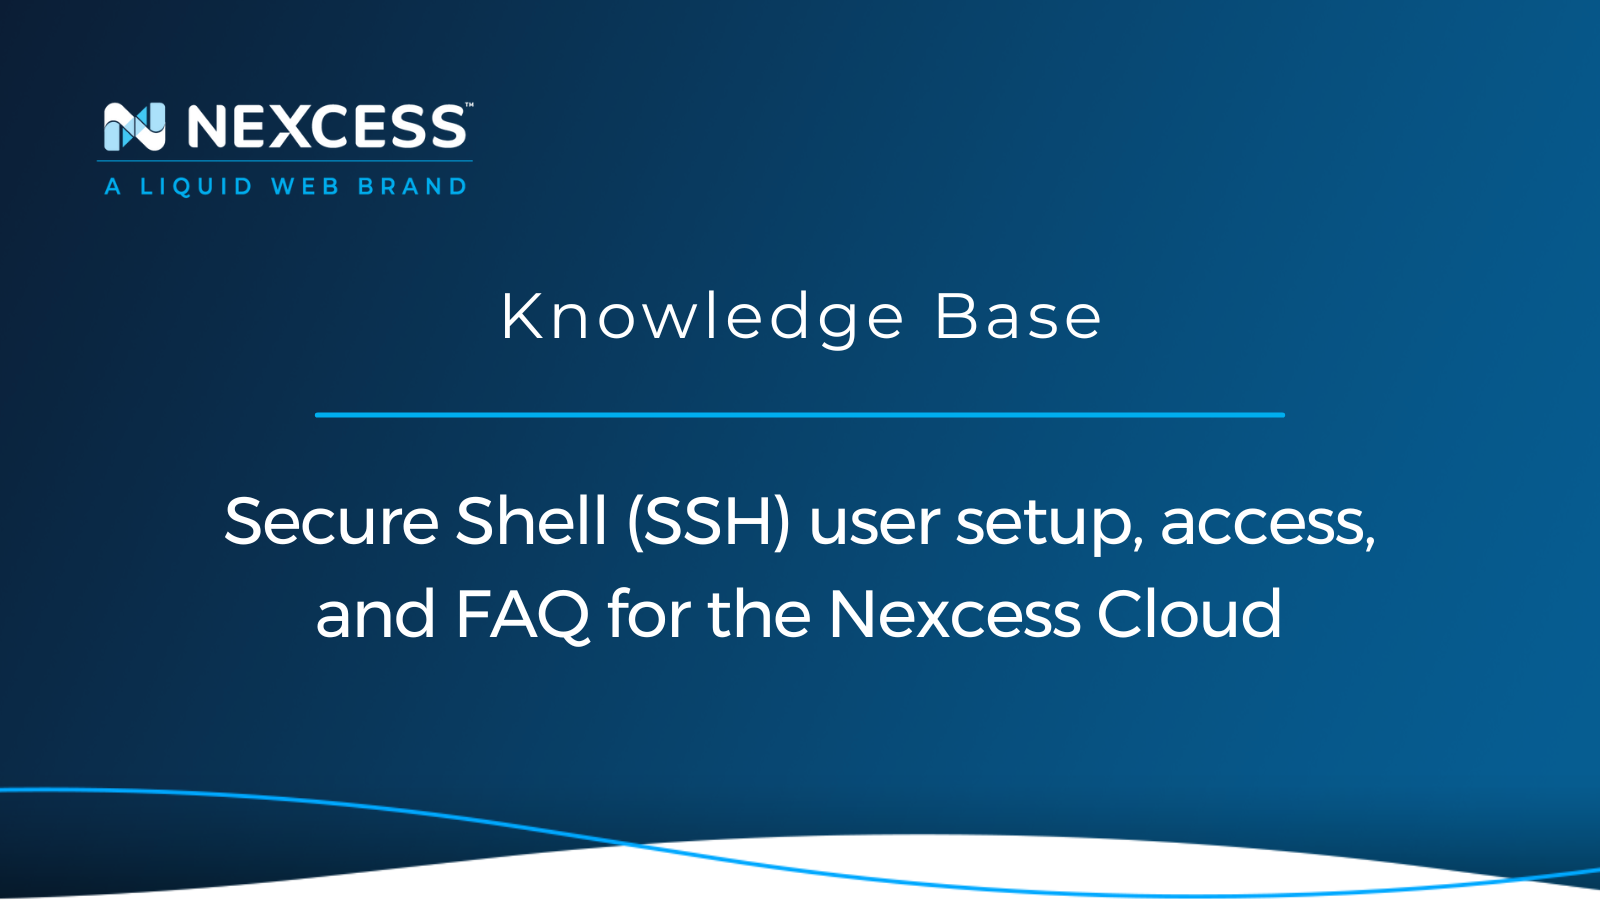 Secure Shell (SSH) user setup, access, and FAQ for the Nexcess Cloud